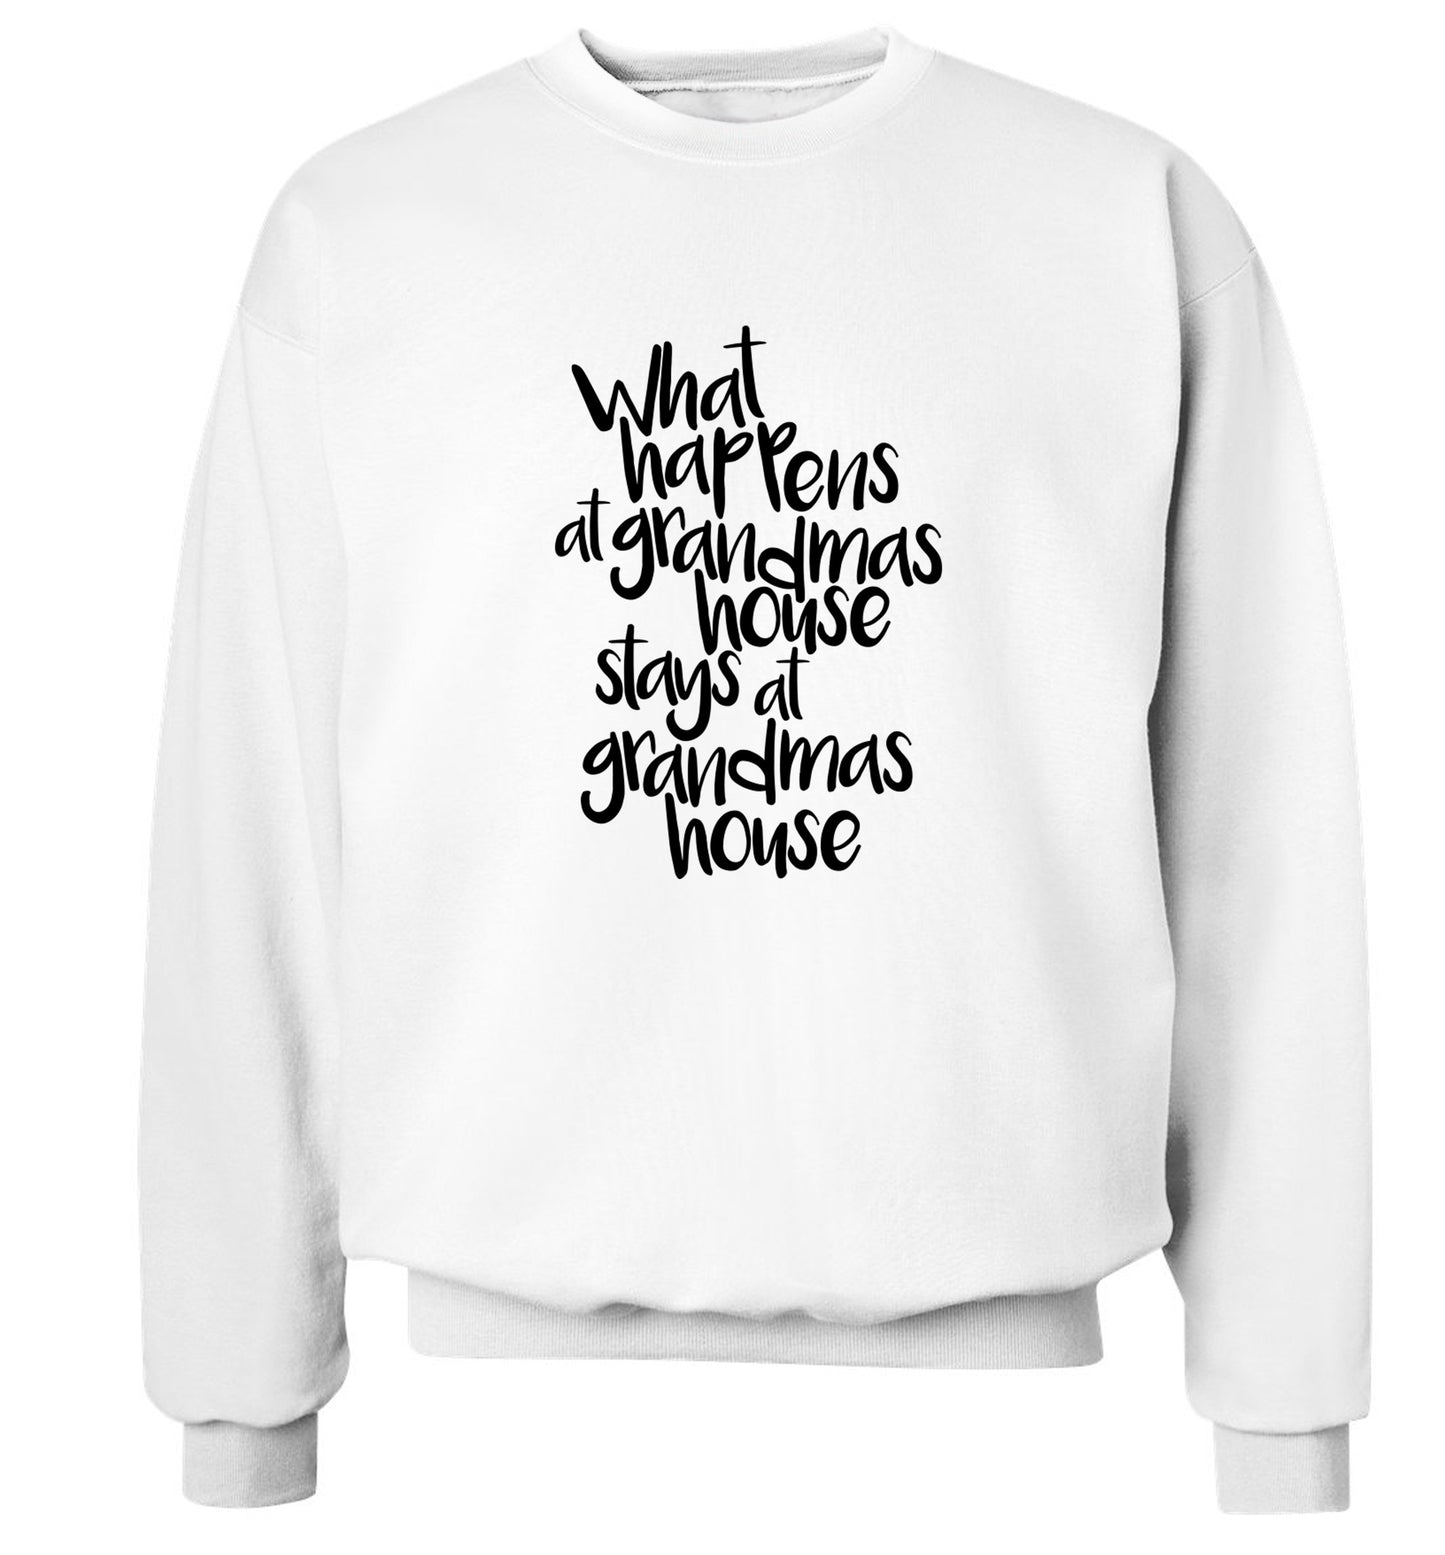 What happens at grandmas house stays at grandmas house Adult's unisex white Sweater 2XL